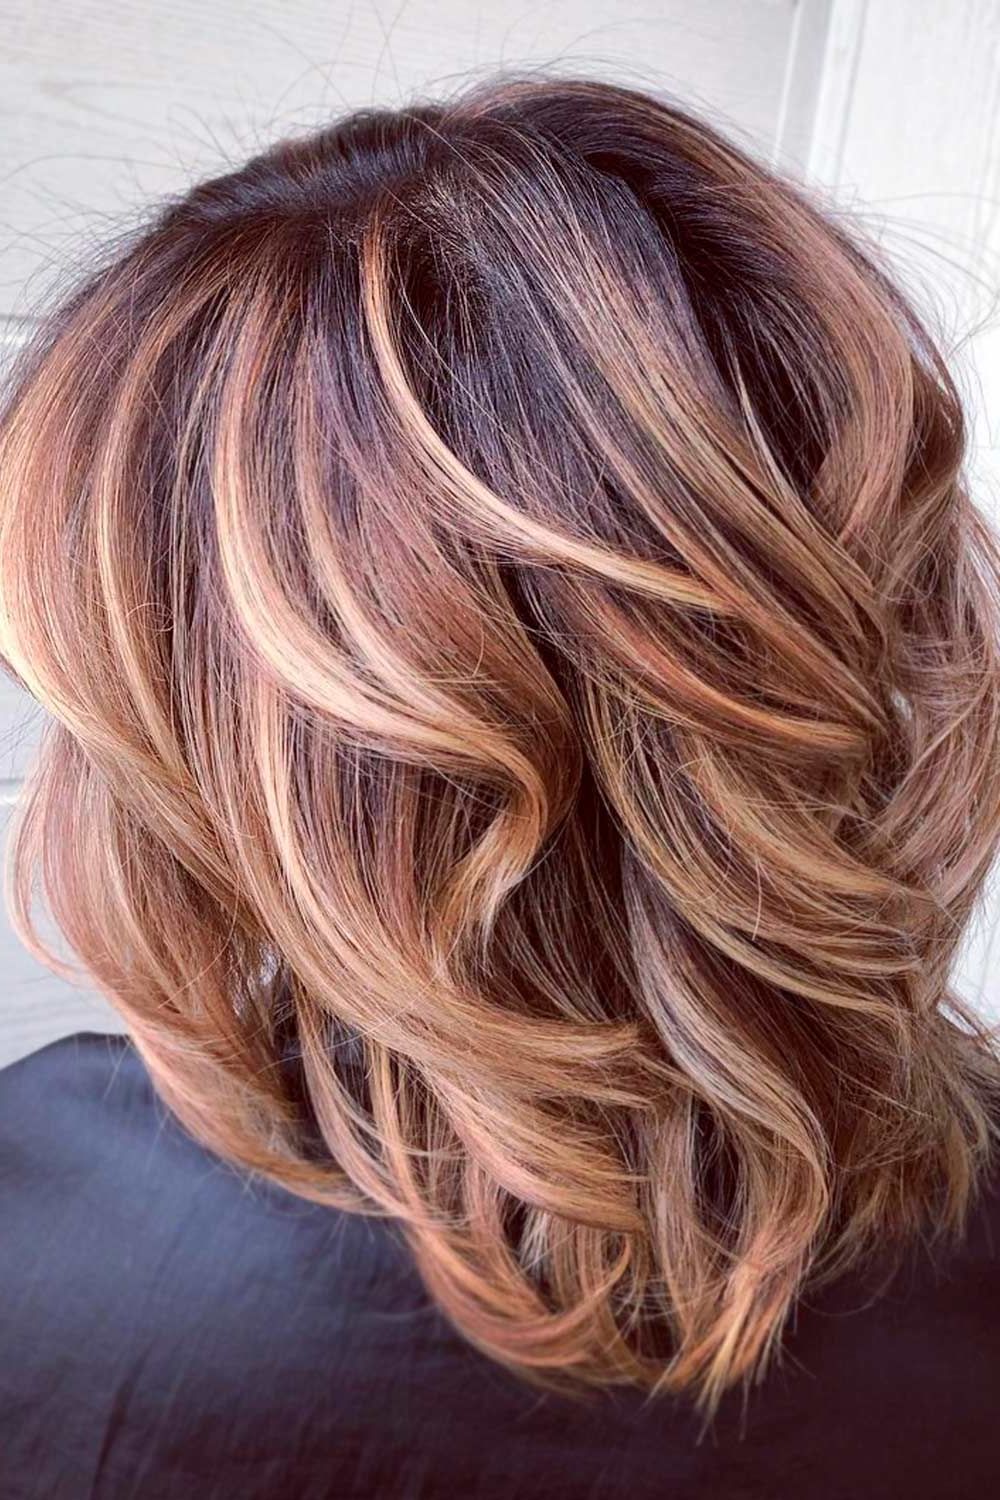 Untraditional Lob Haircut Ideas To Give A Try | Lovehairstyles Within Newest Wavy Lob Haircuts With Caramel Highlights (View 13 of 25)